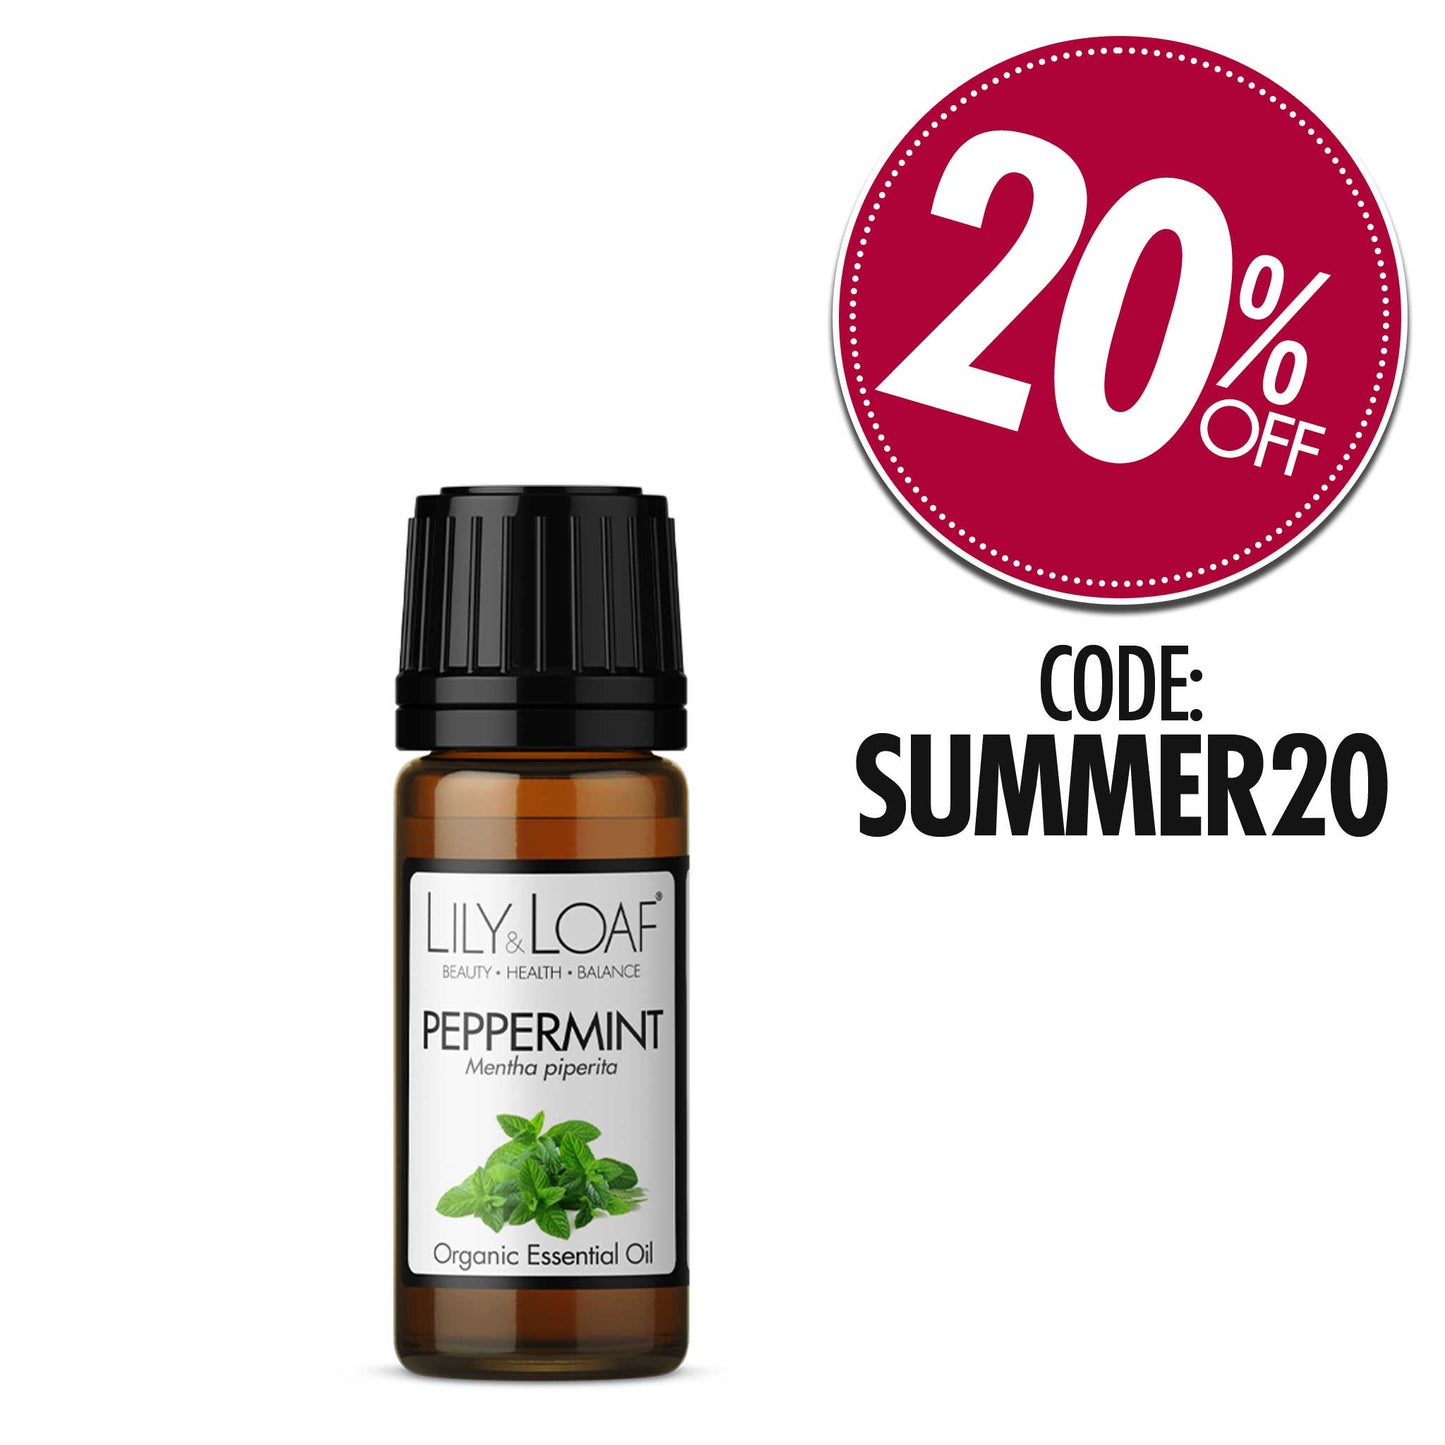 Peppermint Essential Oil with 20% Off